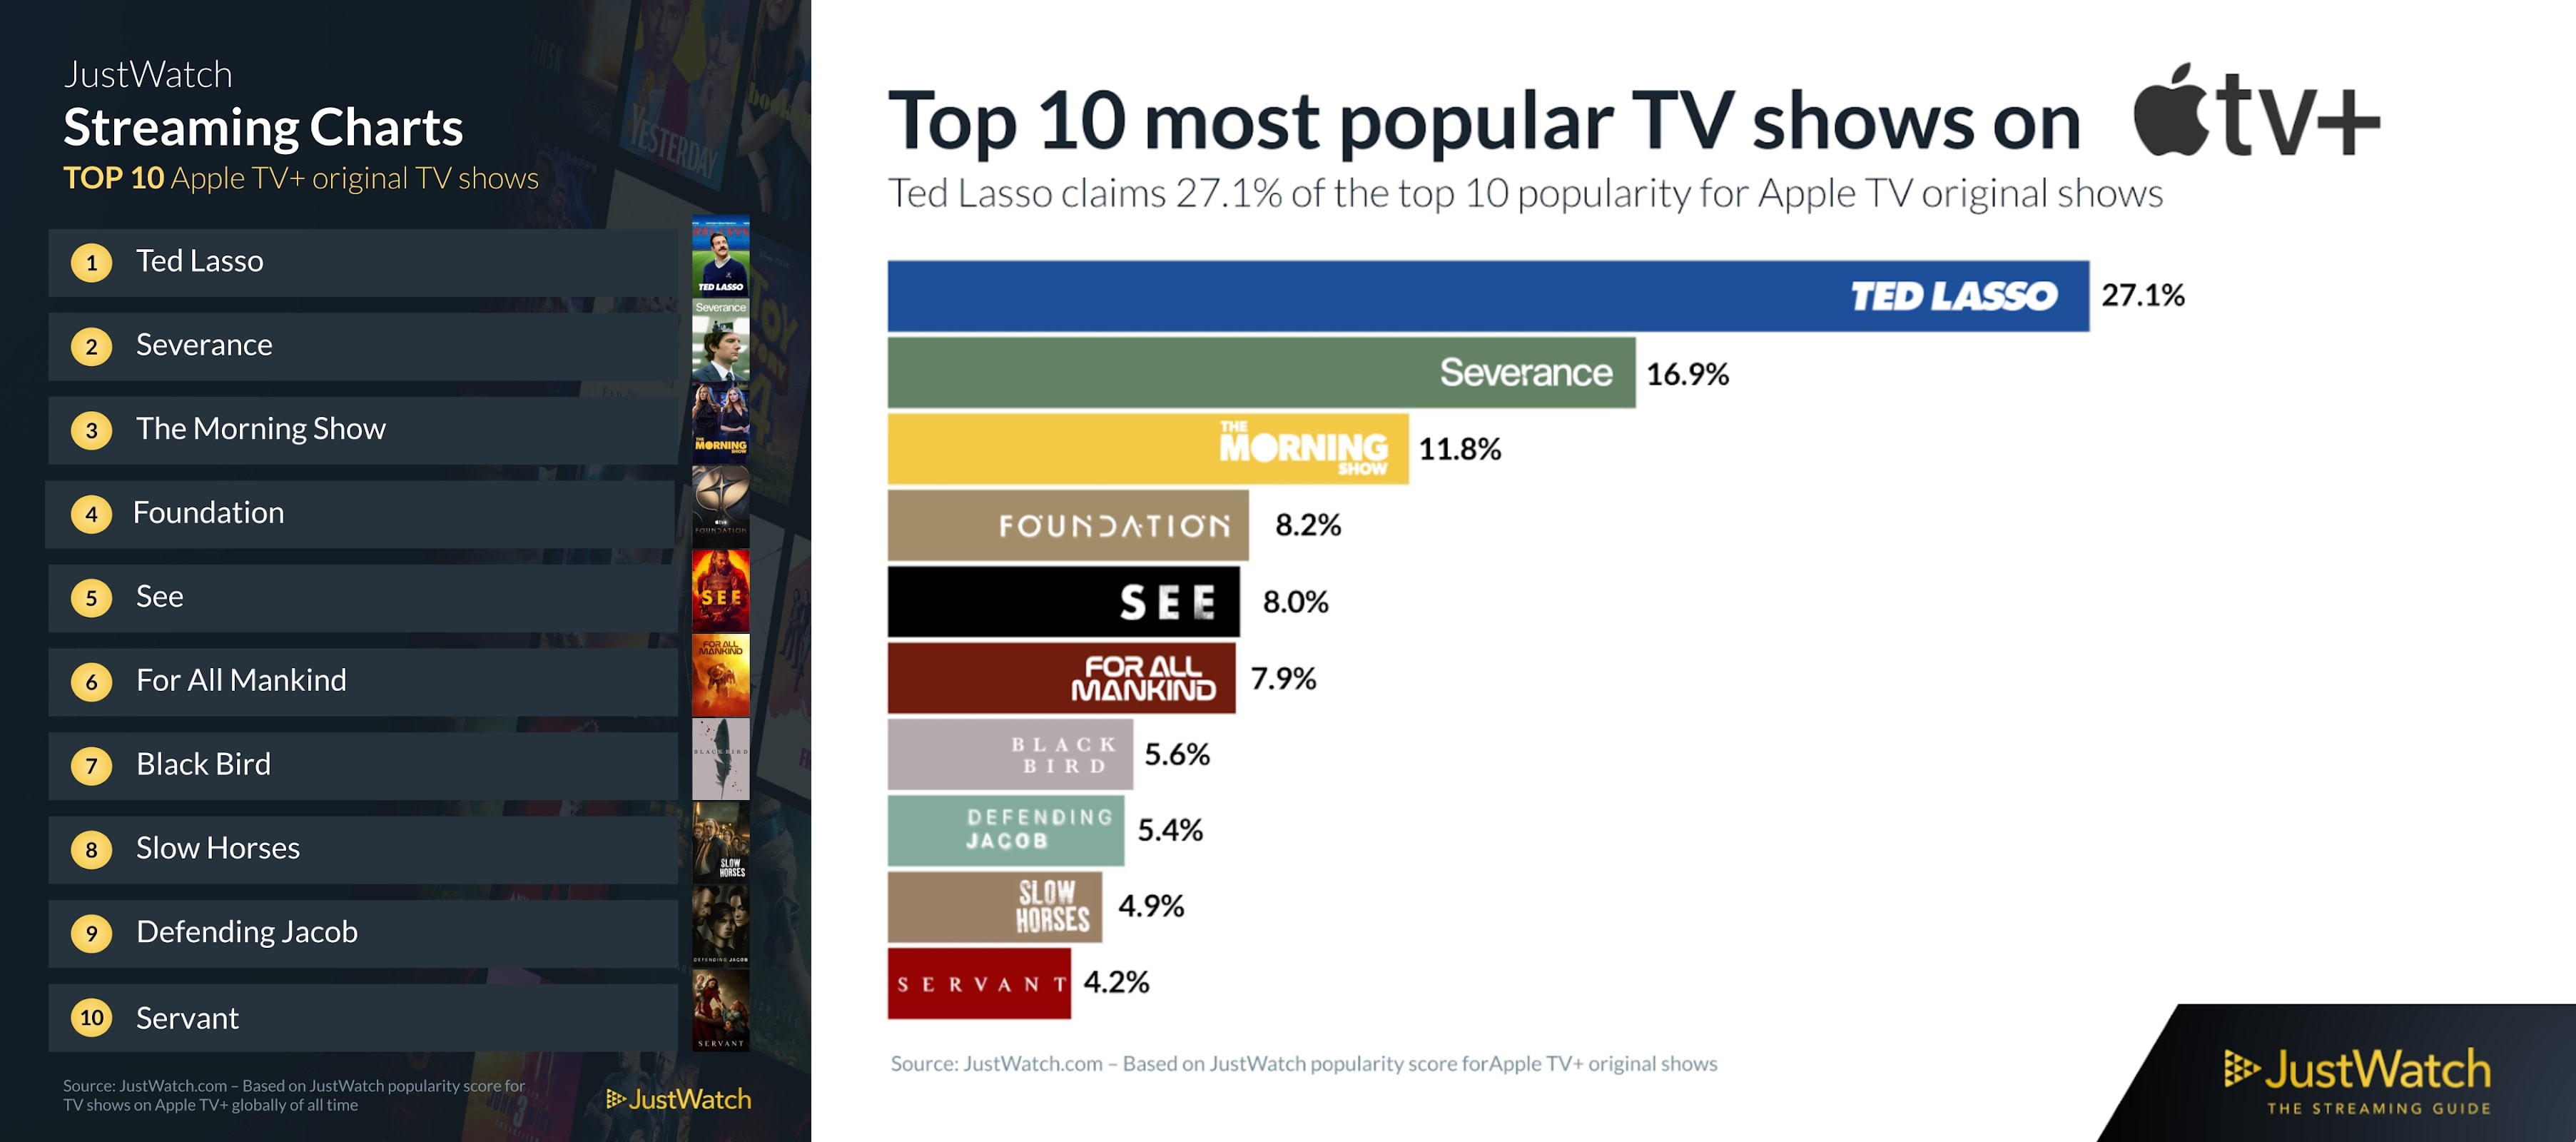 Top 10 most popular shows on Apple TV+